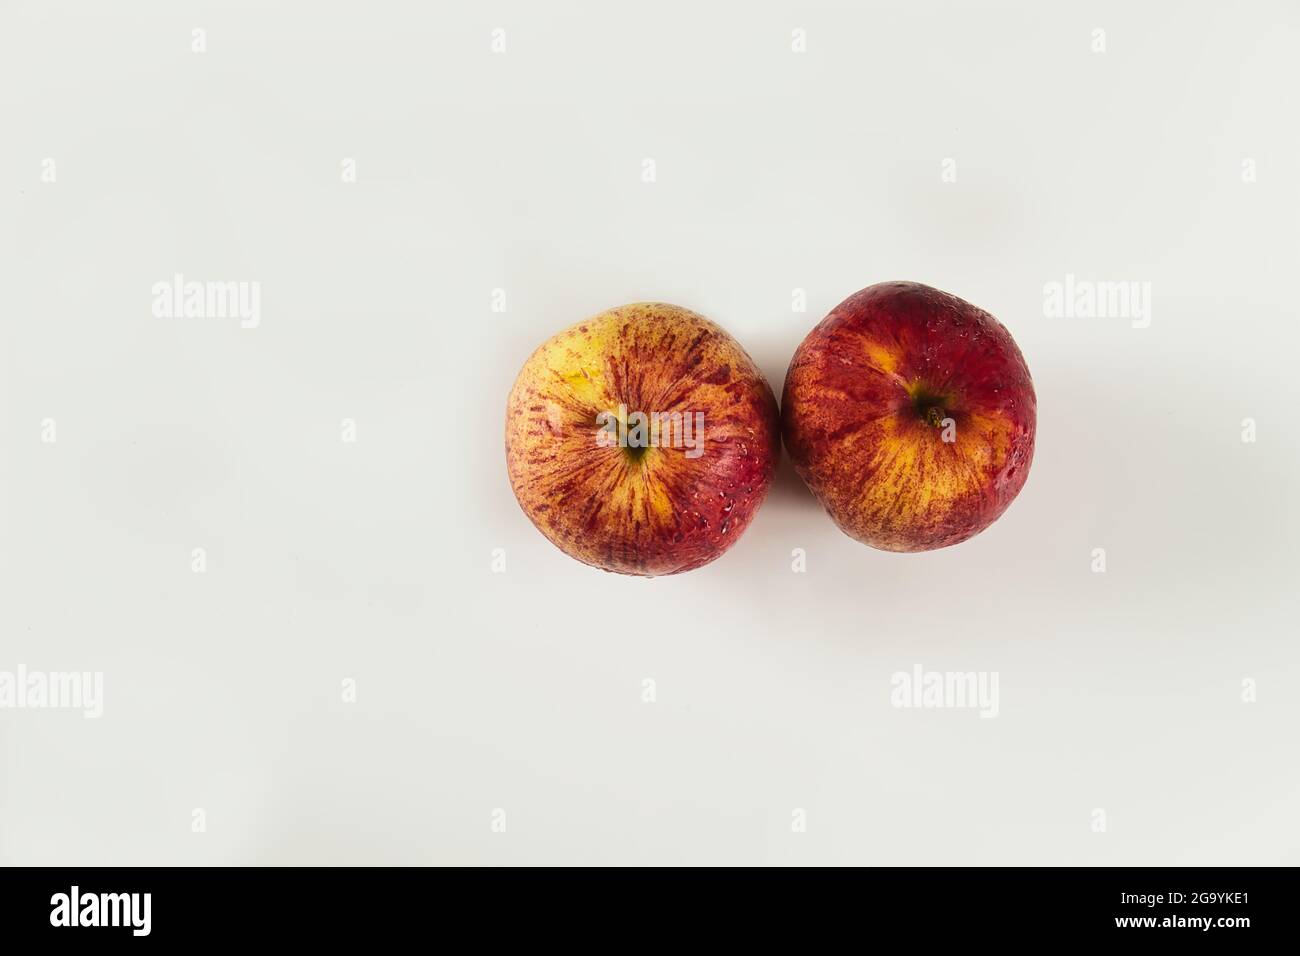 foreground of two red apples with drops on white background viewed from above Stock Photo